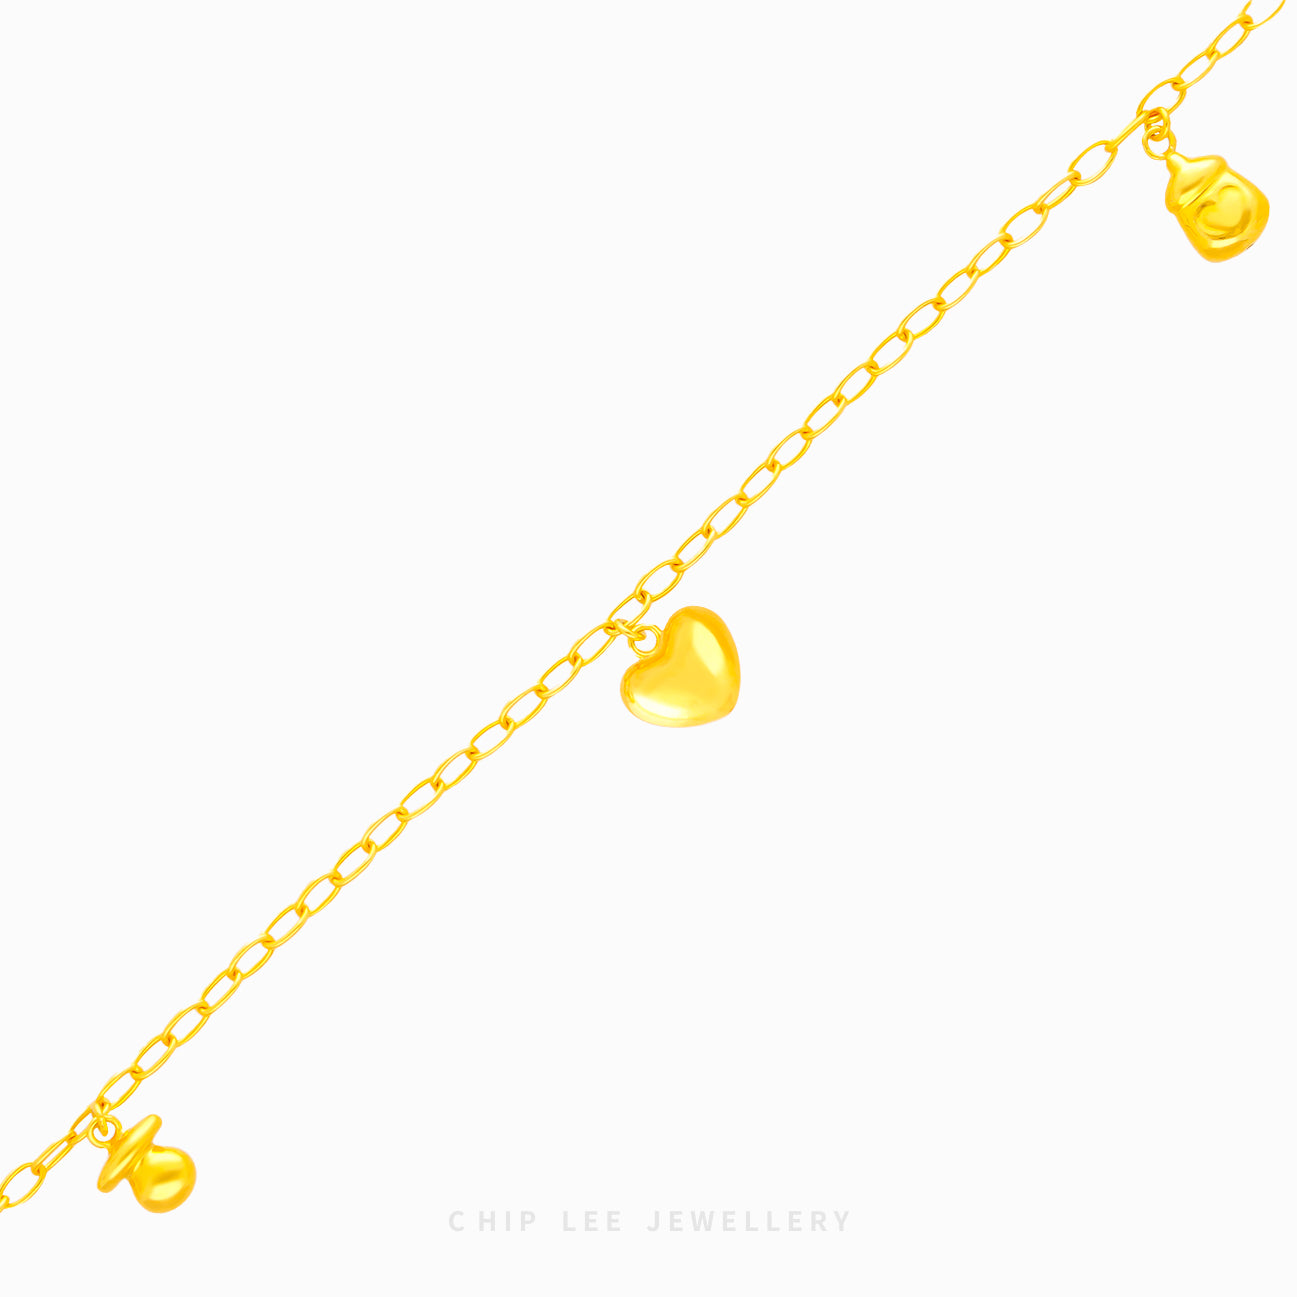 Mixed Charm Baby Anklet - Chip Lee Jewellery